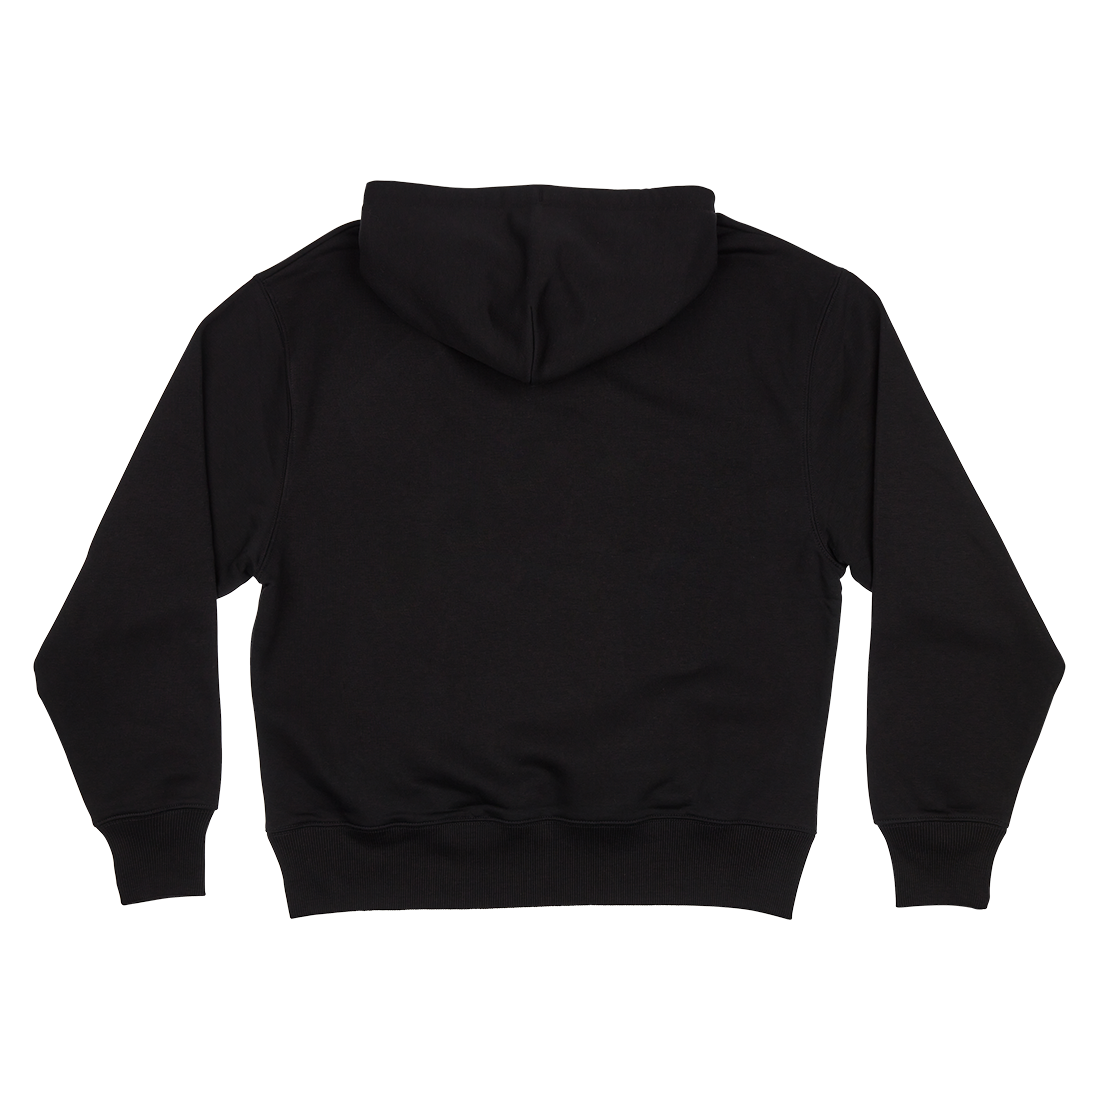 Island Records - Embroidered Logo Black Hoodie